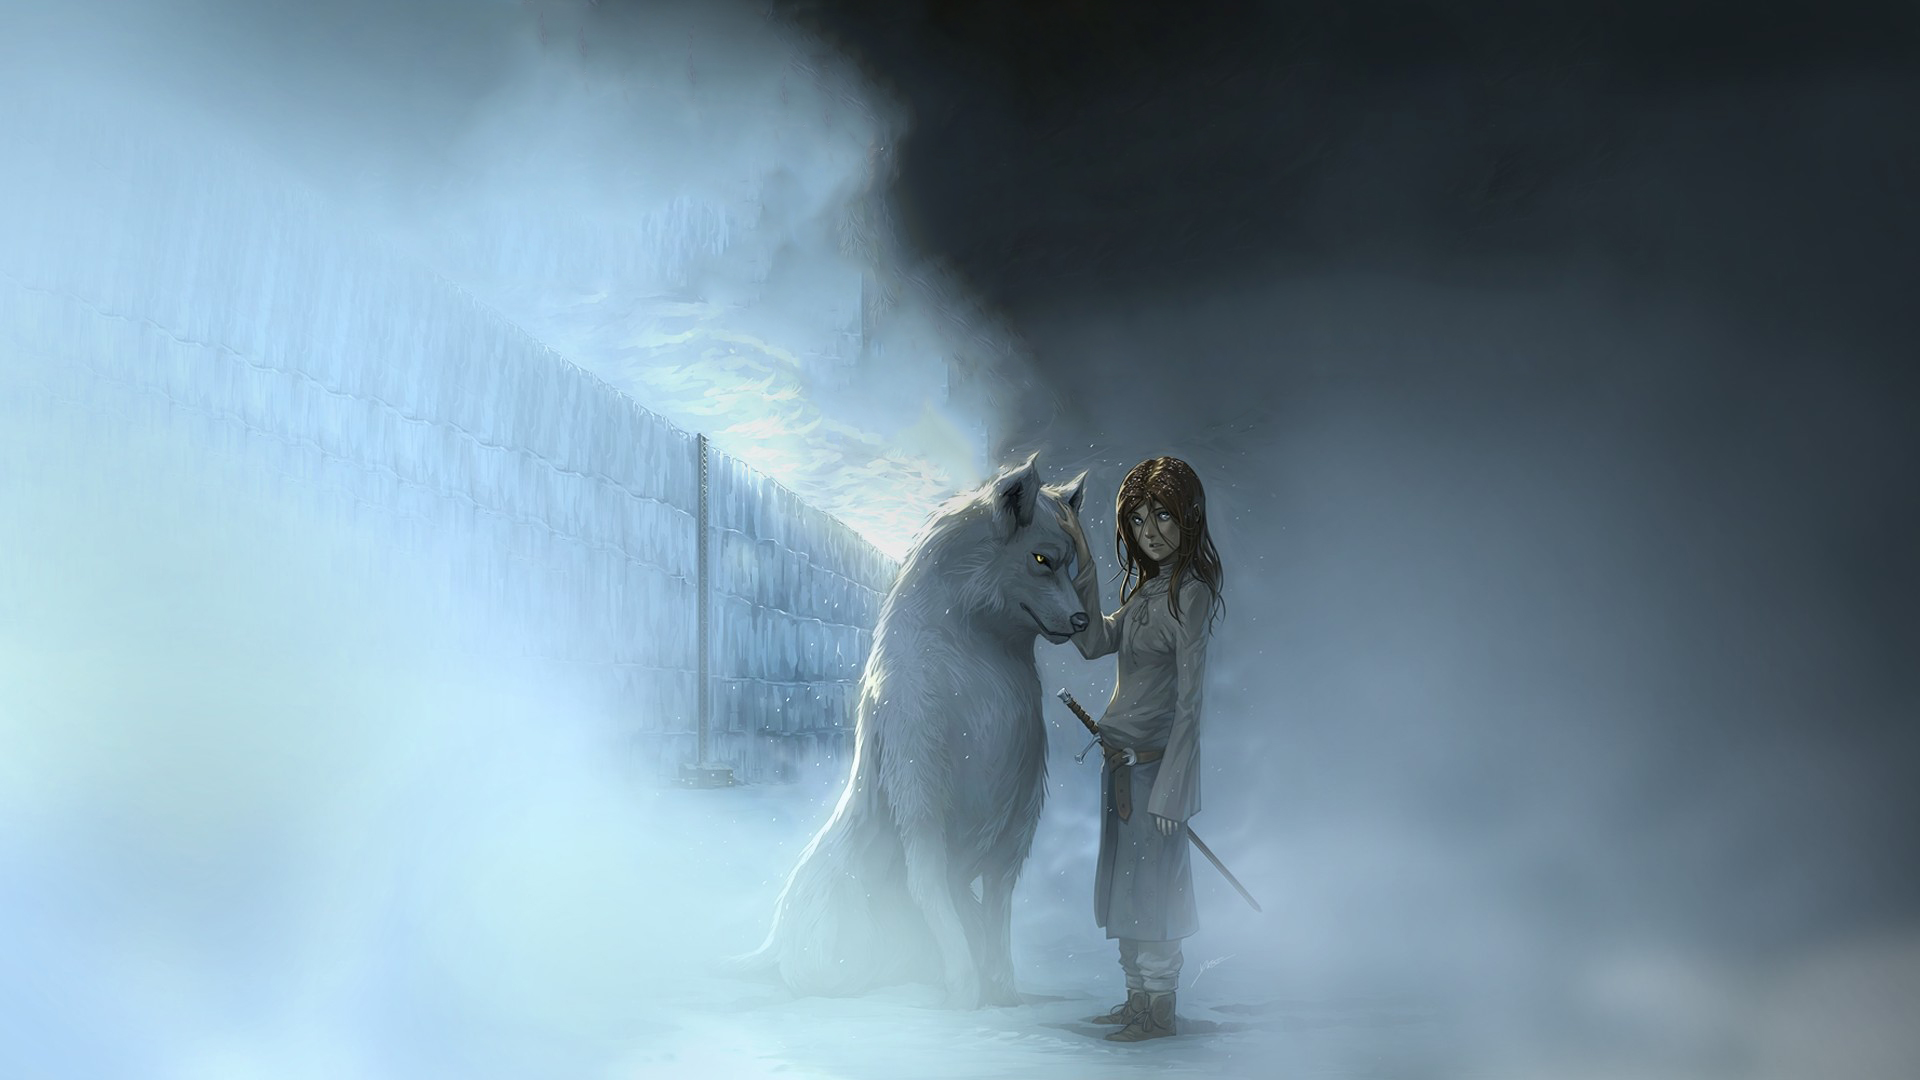 game of thrones wallpaper,atmospheric phenomenon,water,photography,fictional character